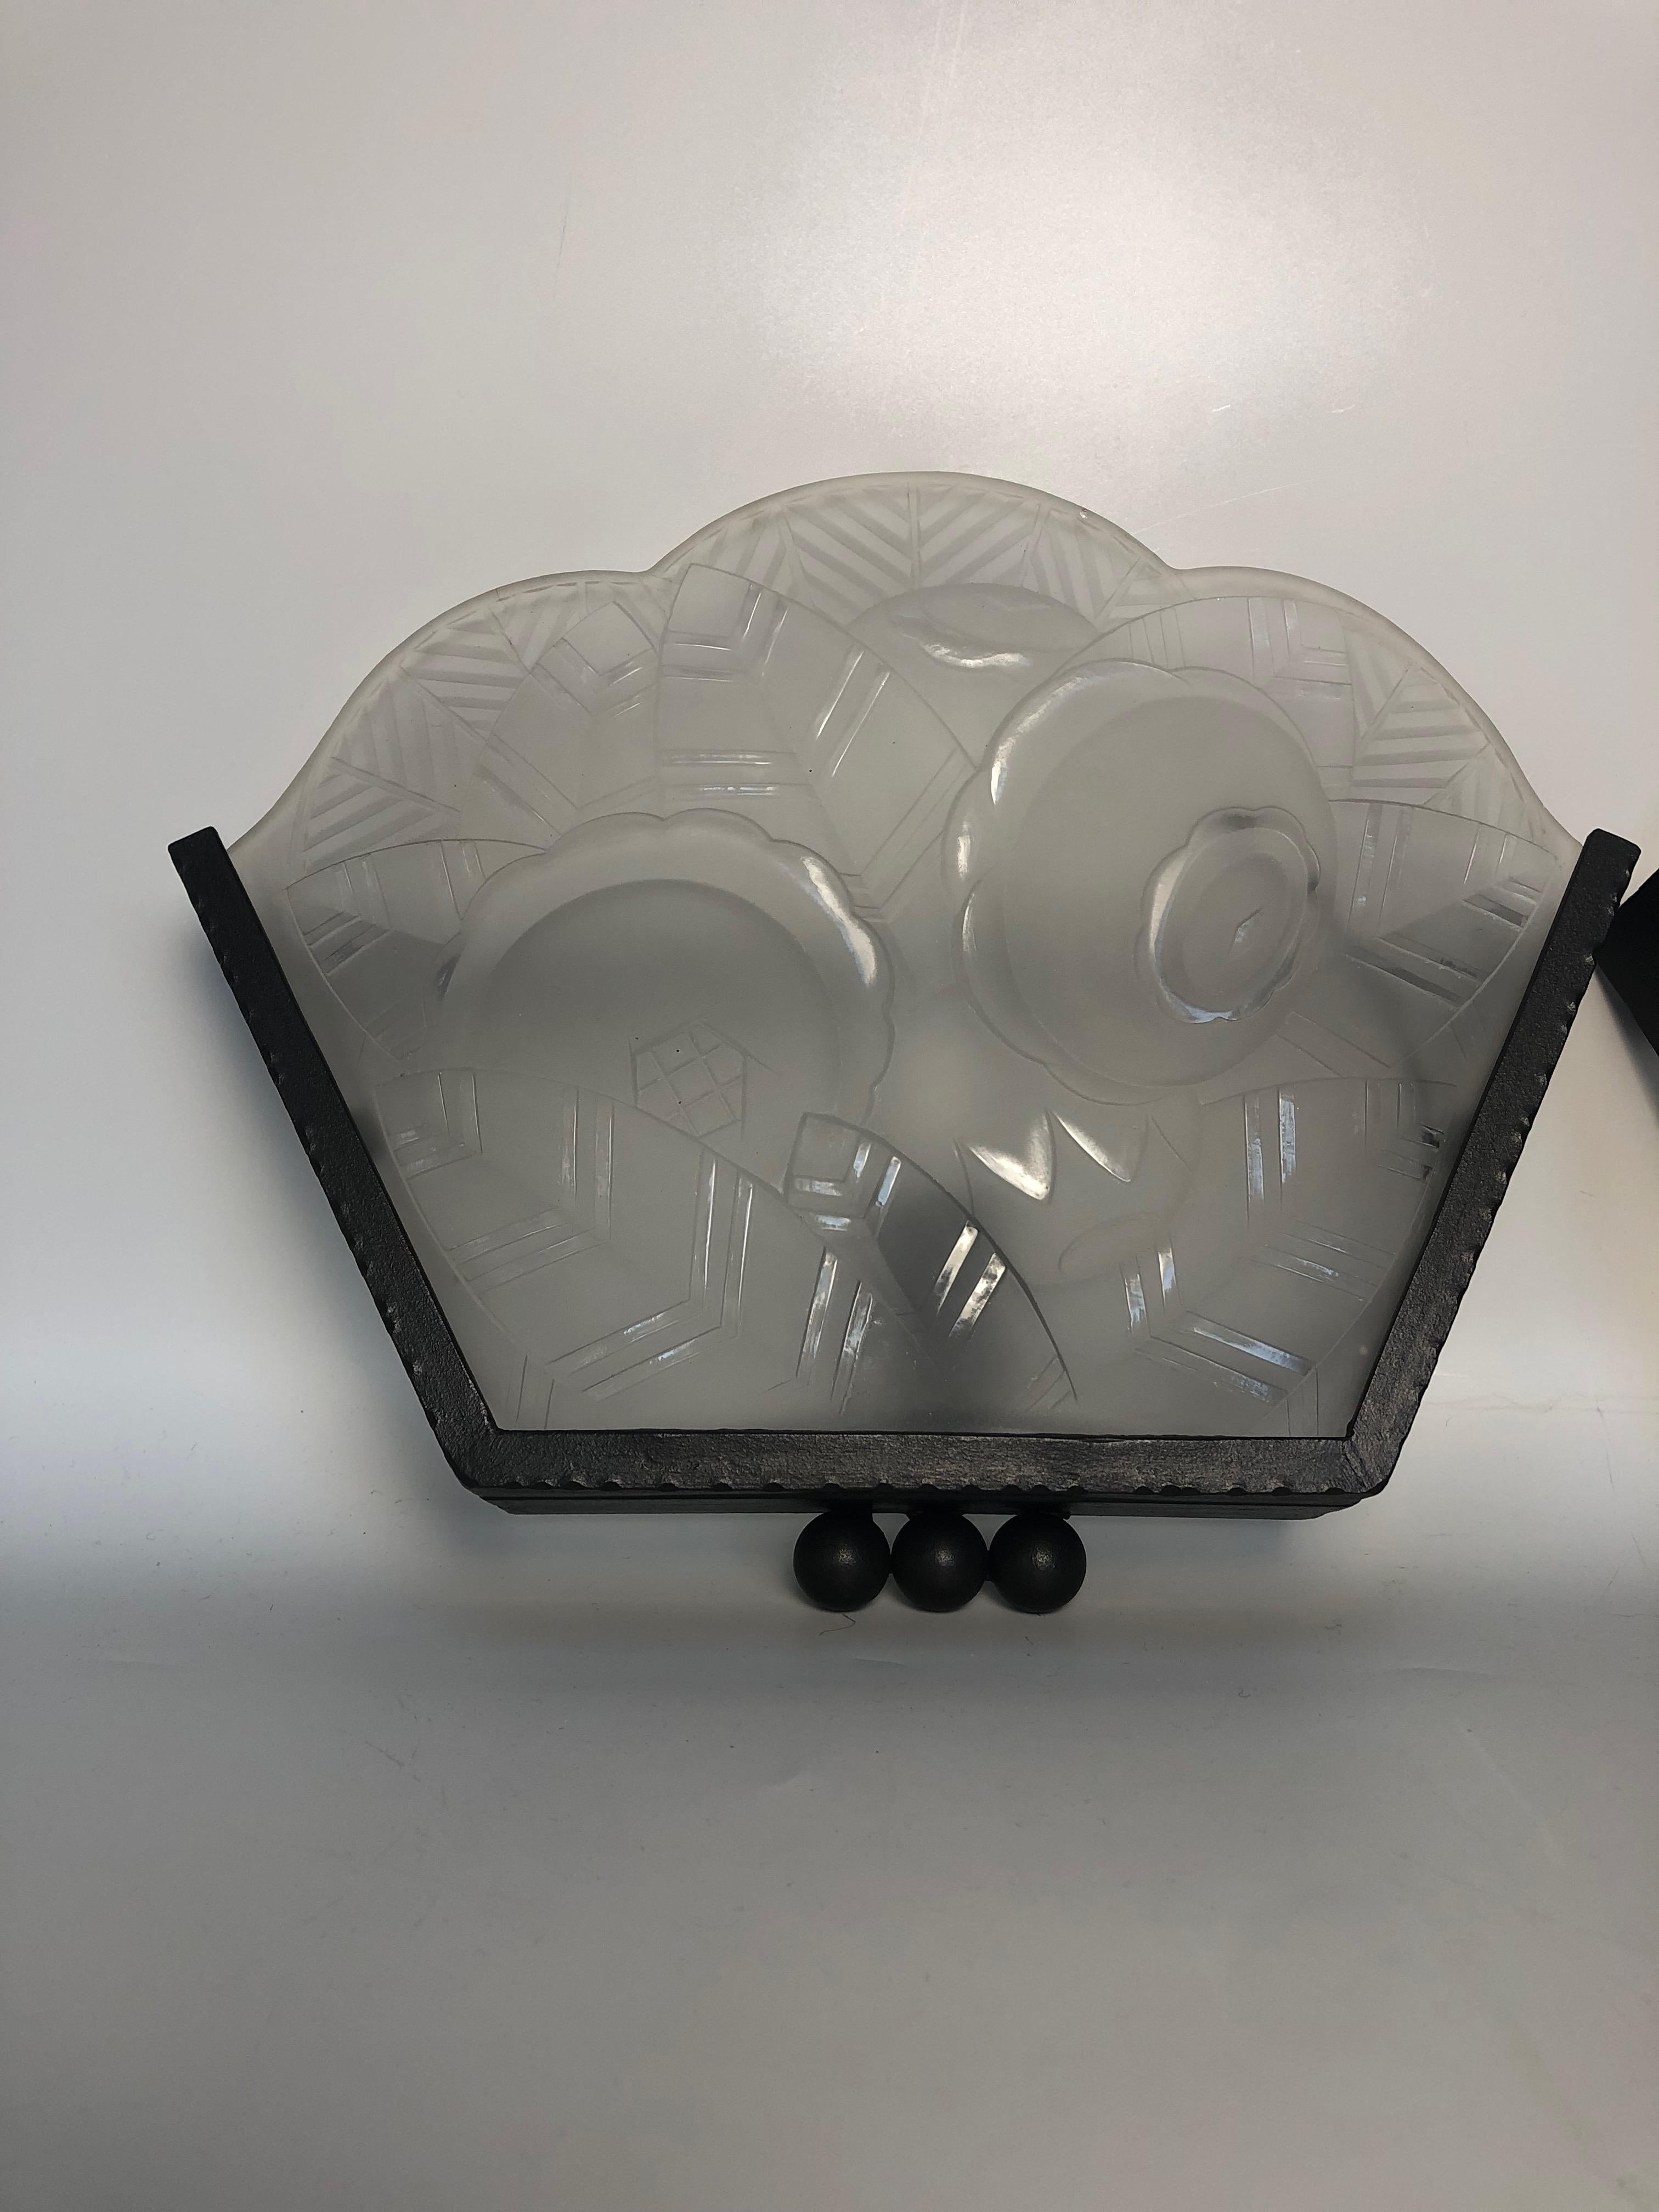 Pair of art deco wall lights circa 1930 with hammered iron frame.
  Molded glass plates decorated with stylized flowers and banana leaves.
Electrified, E14 socket and screw bulb.

Width: 30.5cm
Height: 23.5cm
Depth: 7cm
Weight: 5 Kg